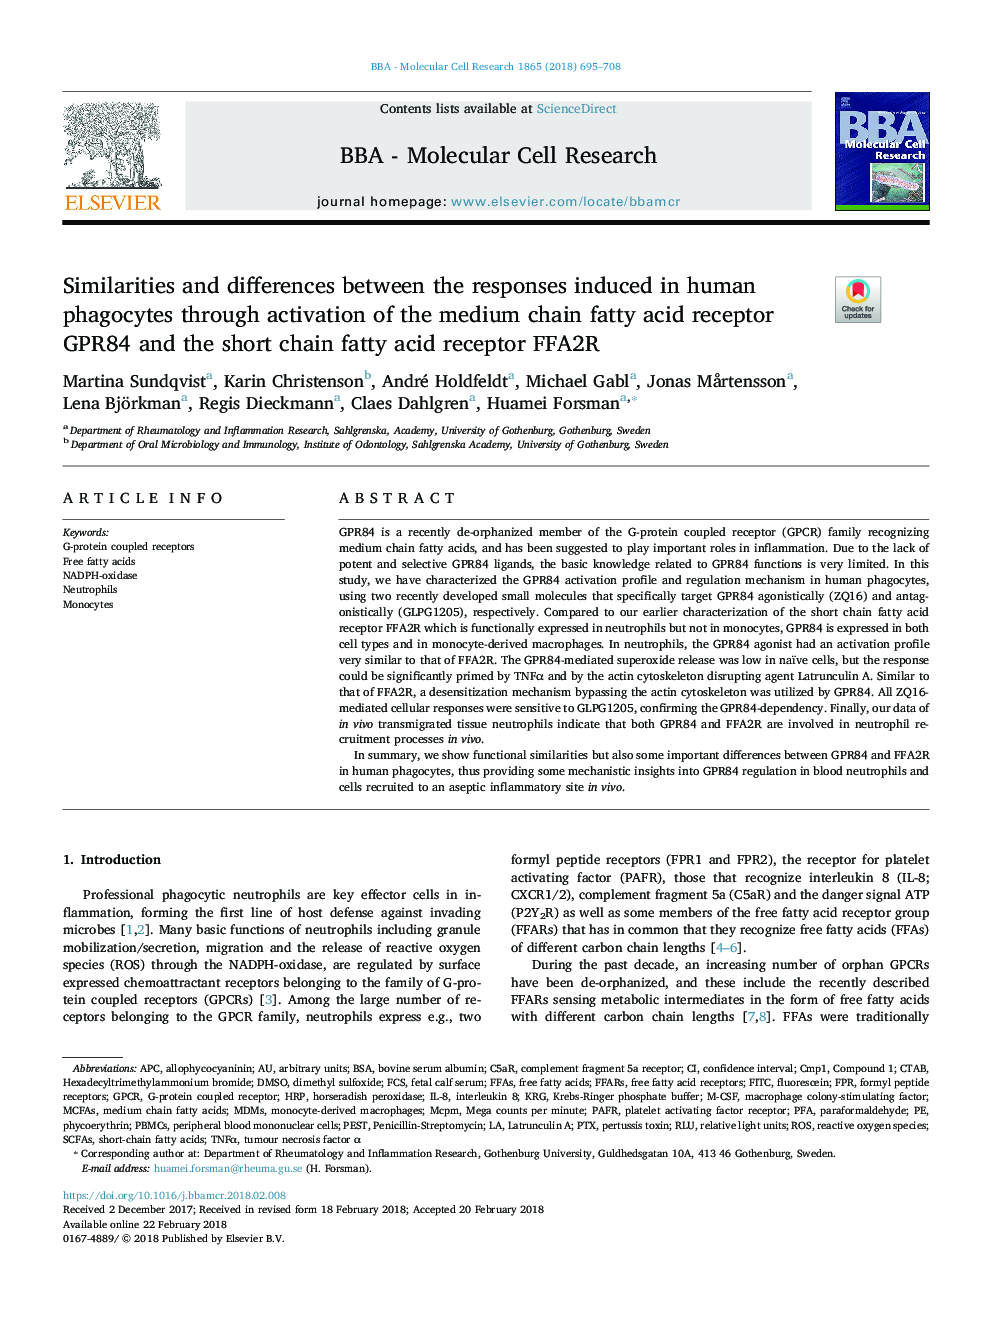 Similarities and differences between the responses induced in human phagocytes through activation of the medium chain fatty acid receptor GPR84 and the short chain fatty acid receptor FFA2R